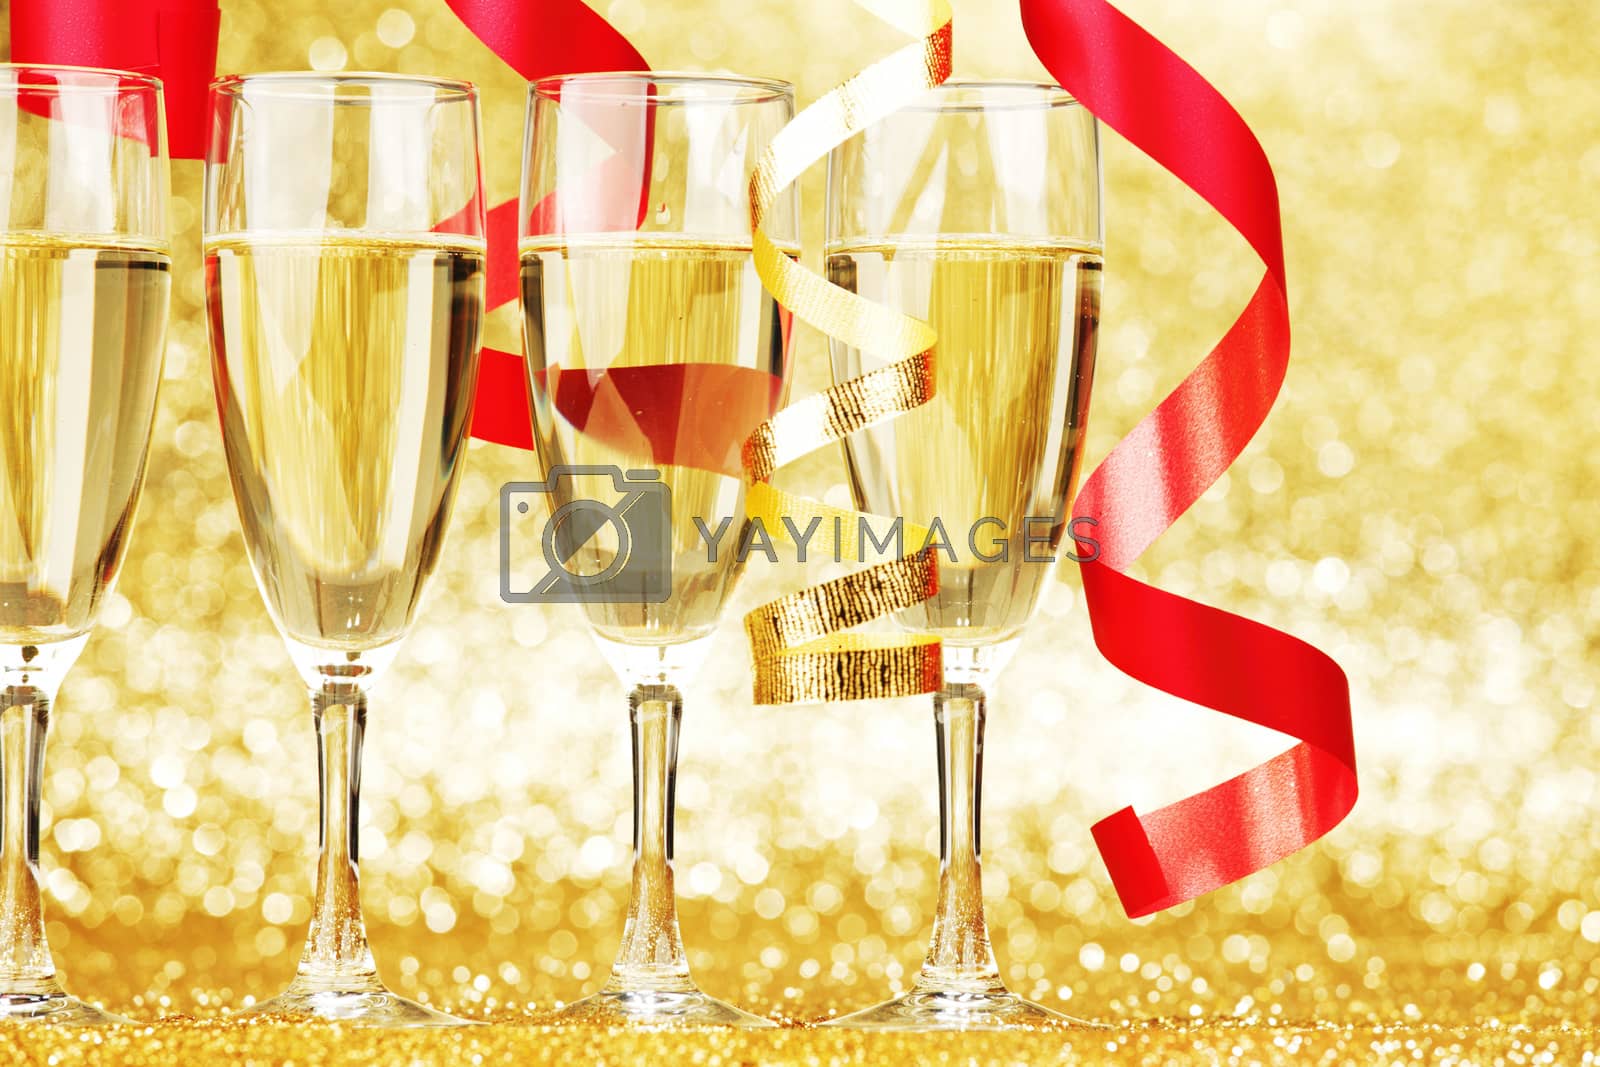 Royalty free image of Champagne and ribbons by Yellowj